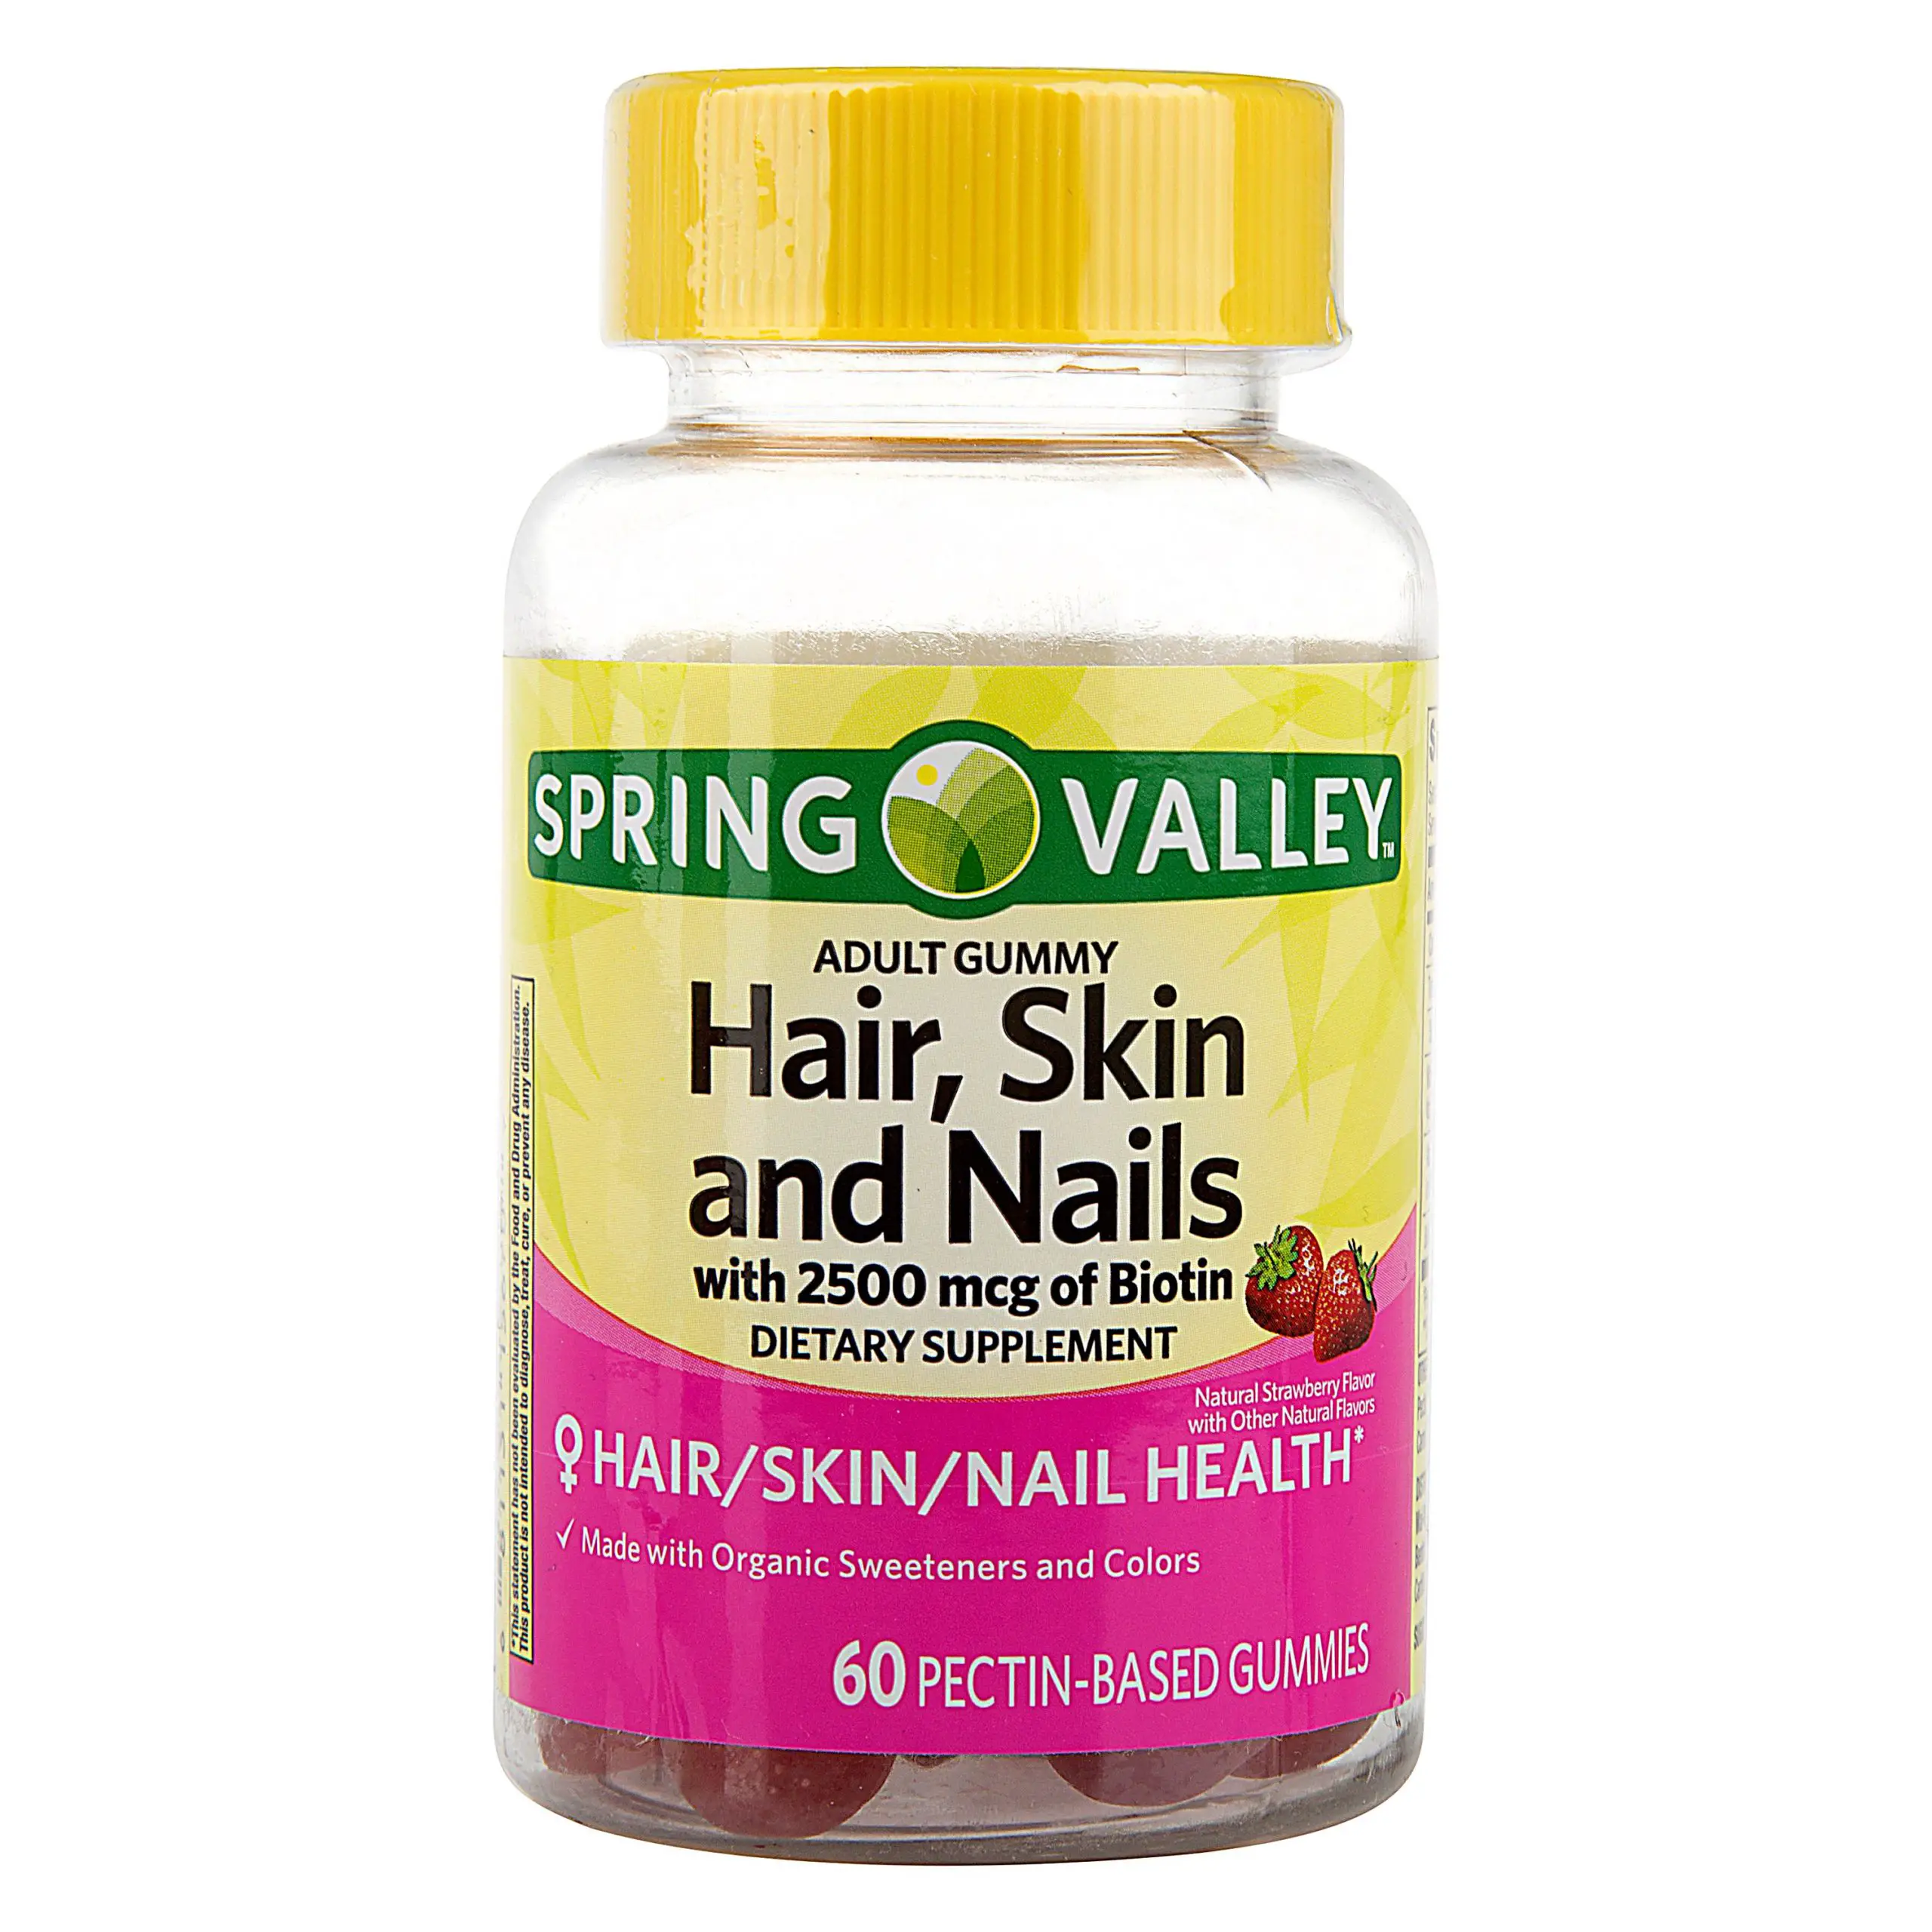 Spring Valley Hair, Skin and Nails Adult Gummies, 60 count